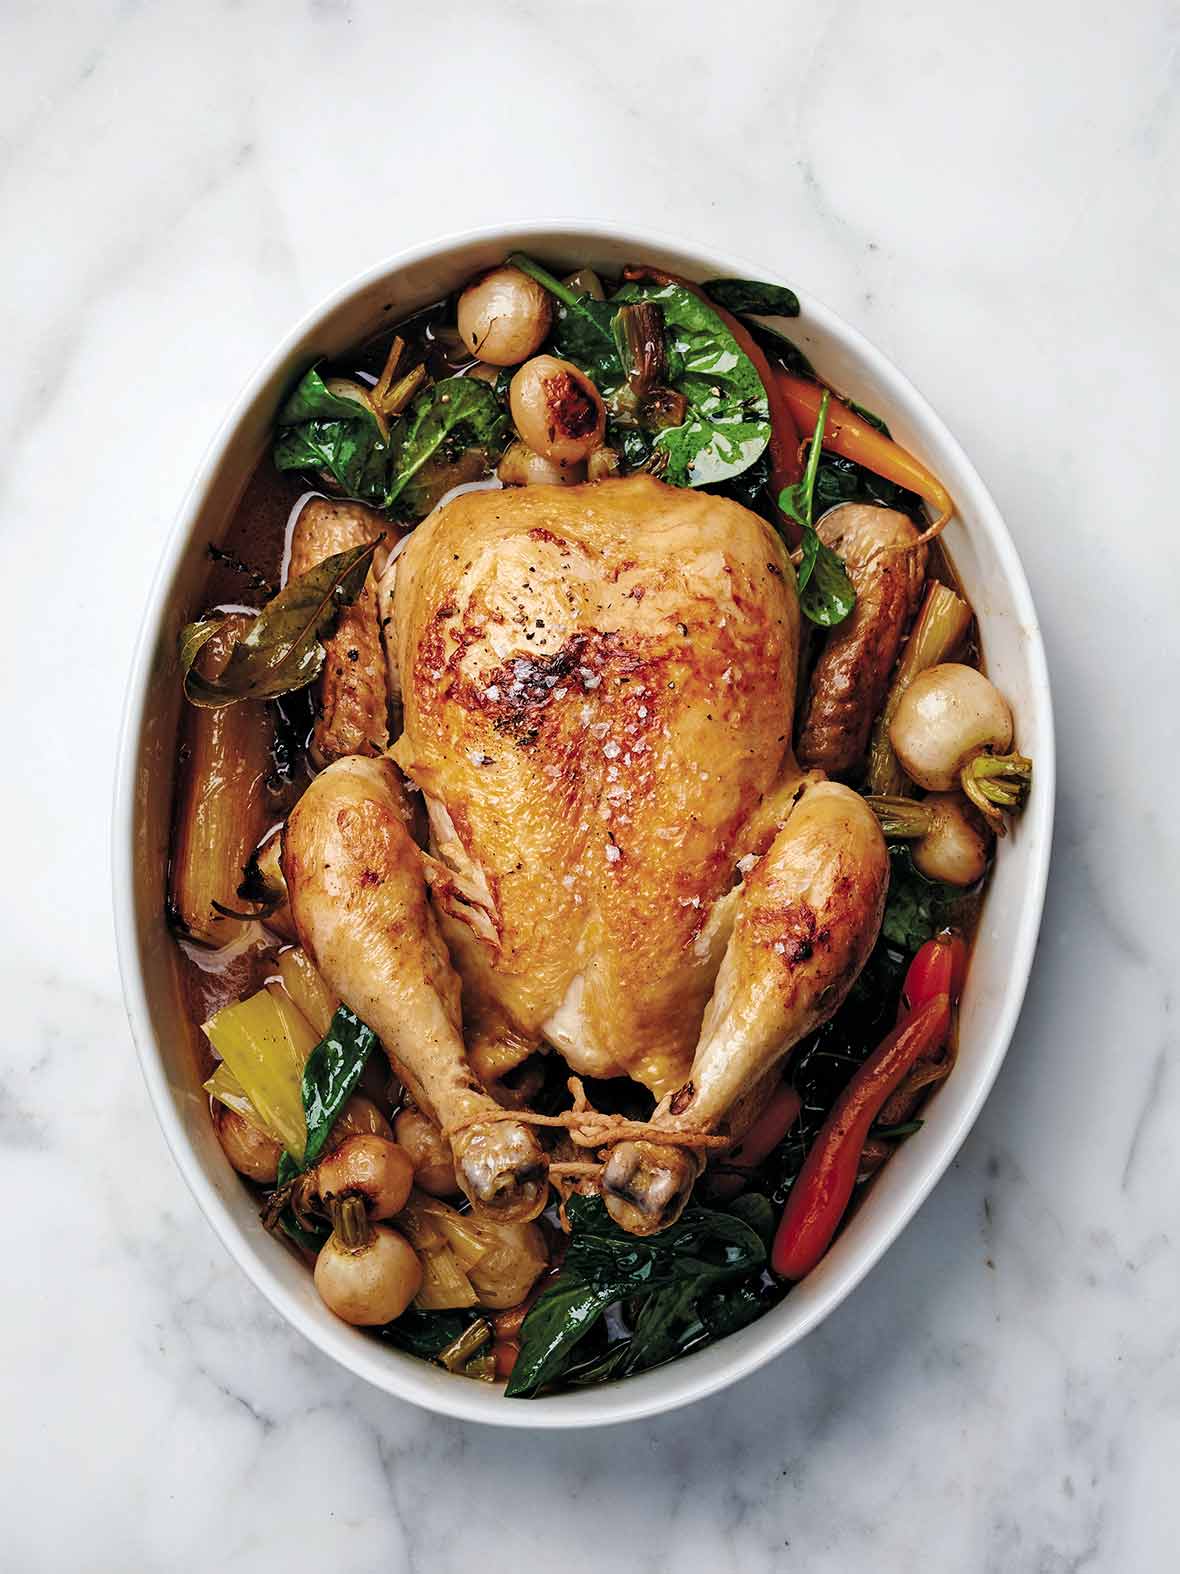 A whole chicken in a pot surrounded by vegetables including carrots, baby turnips, and spinach.